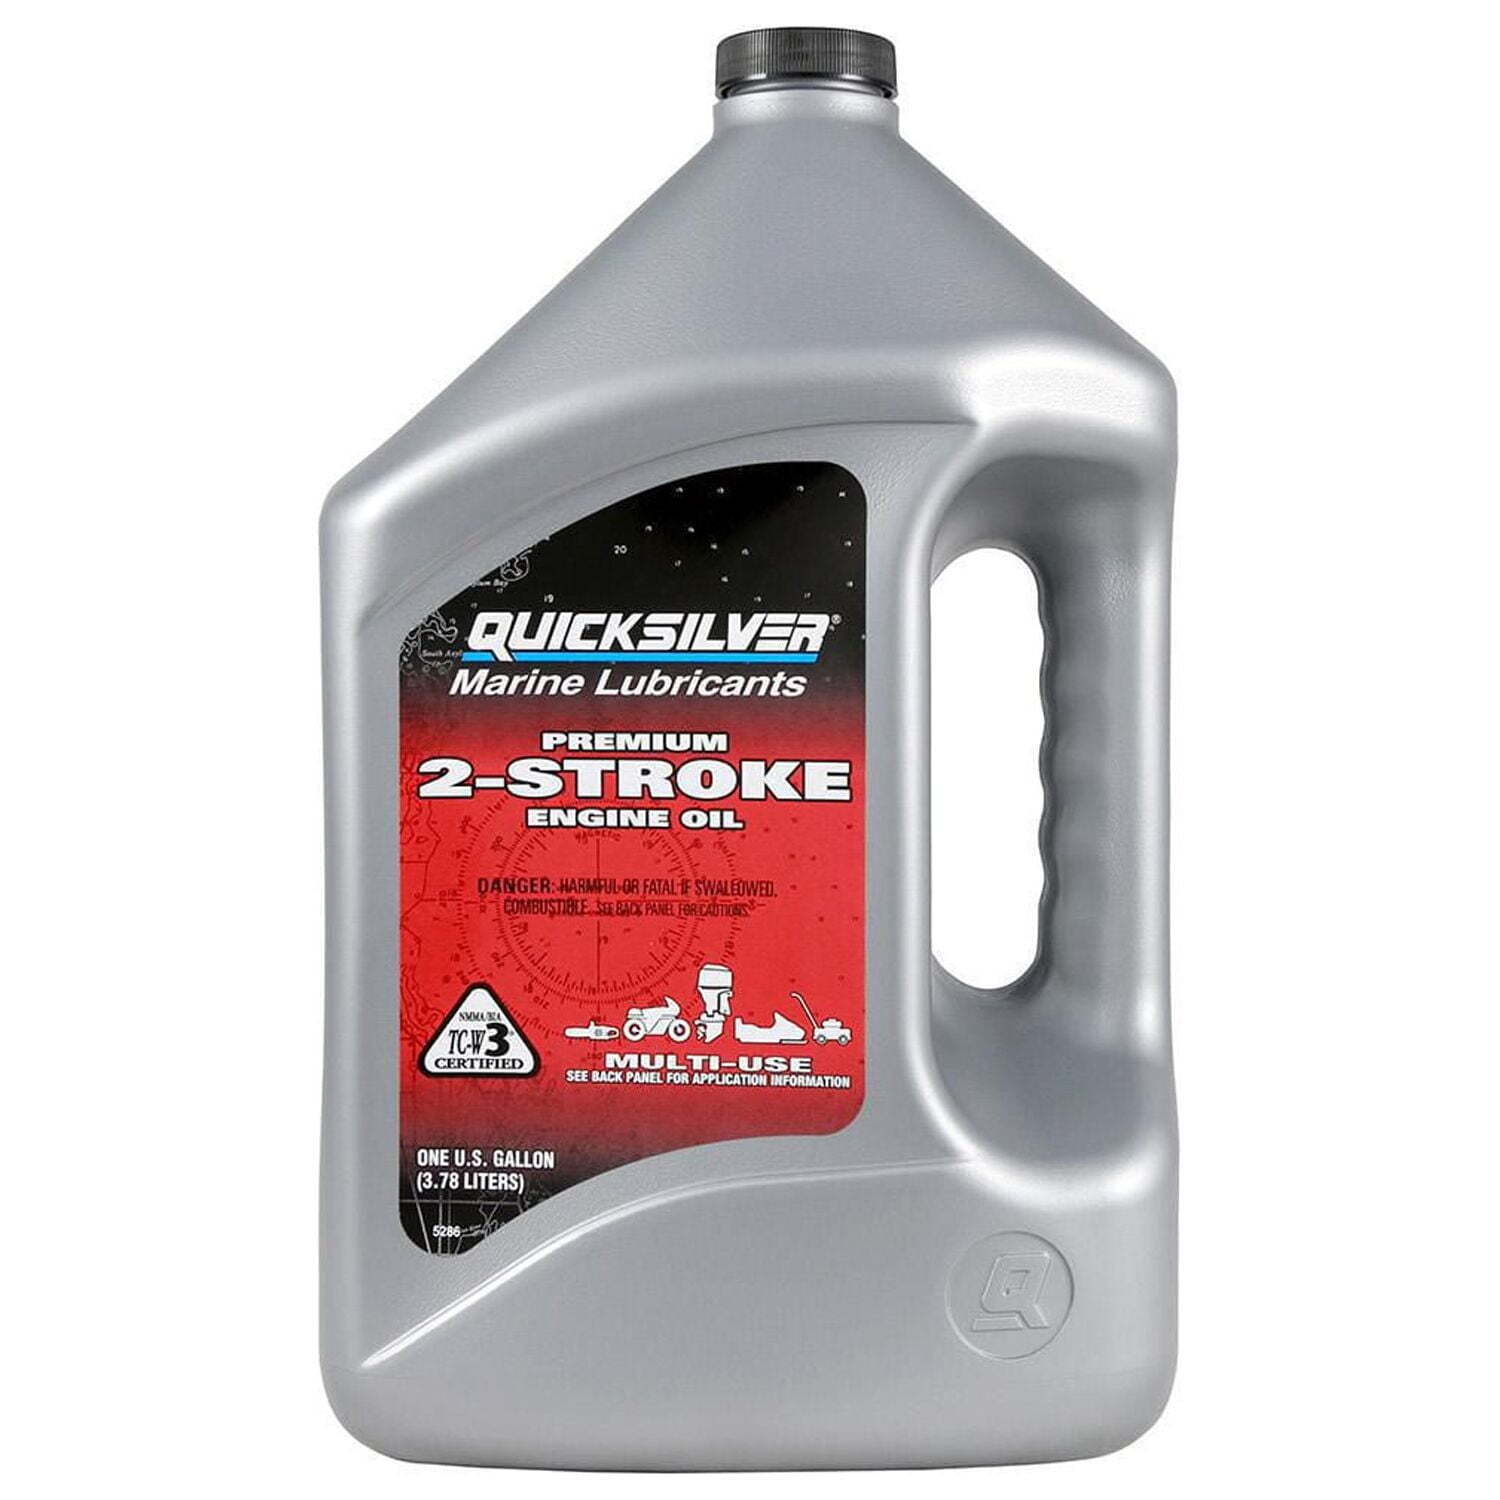 Premium 2-Stroke Engine Oil – Outboards and Powersports - 1 Gallon